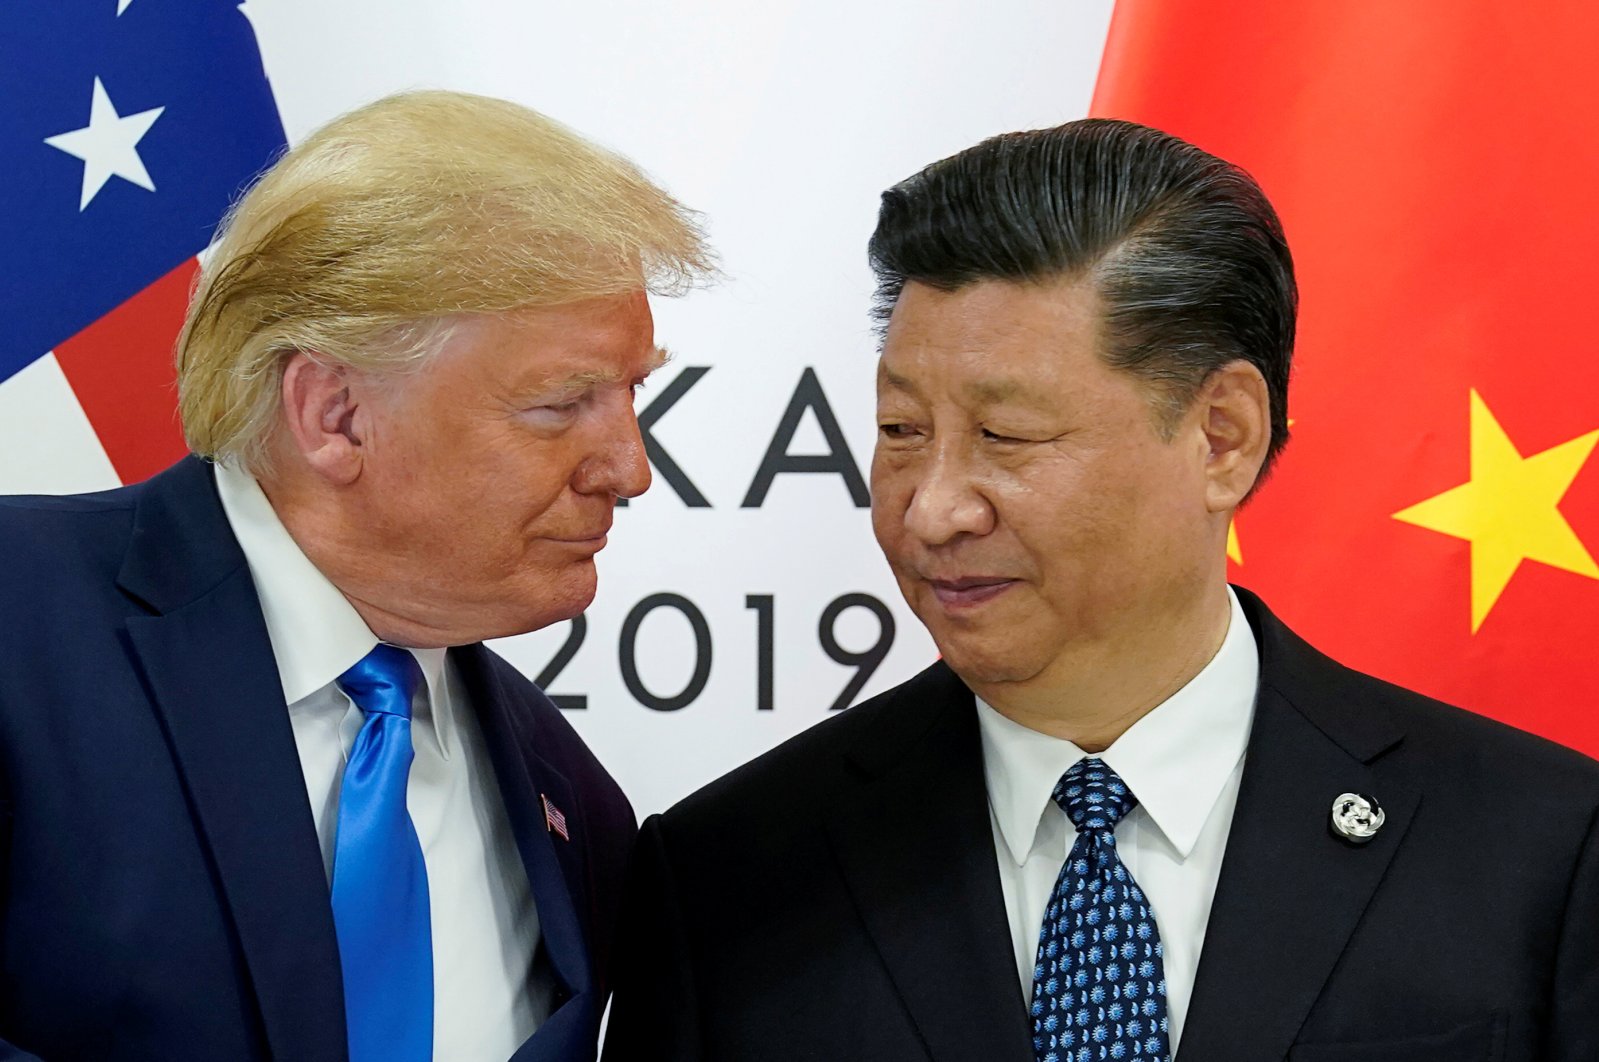  U.S. President Donald Trump meets with China's President Xi Jinping at the start of their bilateral meeting at the G20 leaders summit in Osaka, Japan, June 29, 2019. (Reuters File Photo) 